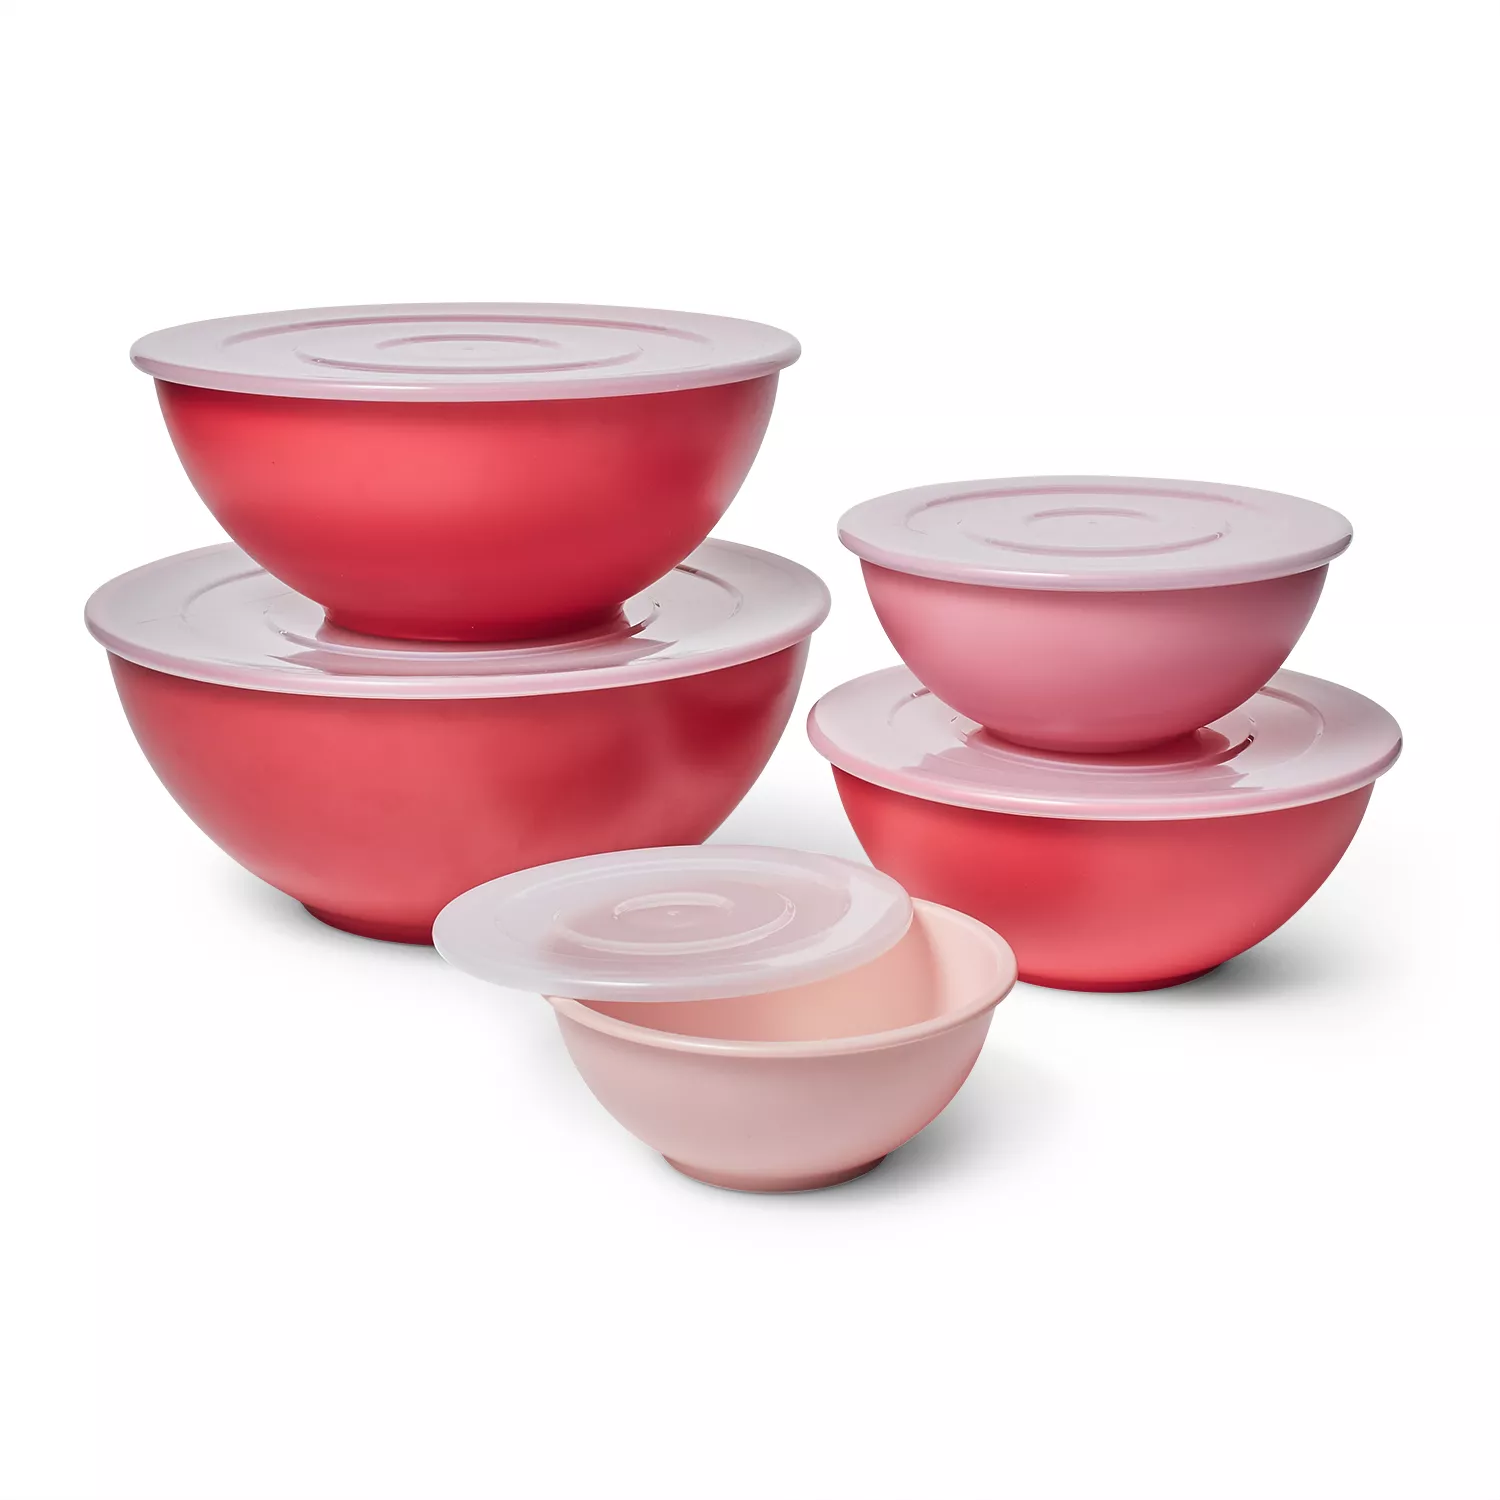 P&P CHEF Mixing Bowl with Lid Set of 5, 10-Piece Stainless Steel Nesting  Salad Bowl Set for Prepping, Mixing and Serving, Size 4.6, 3, 1.5, 1, 0.7  QT